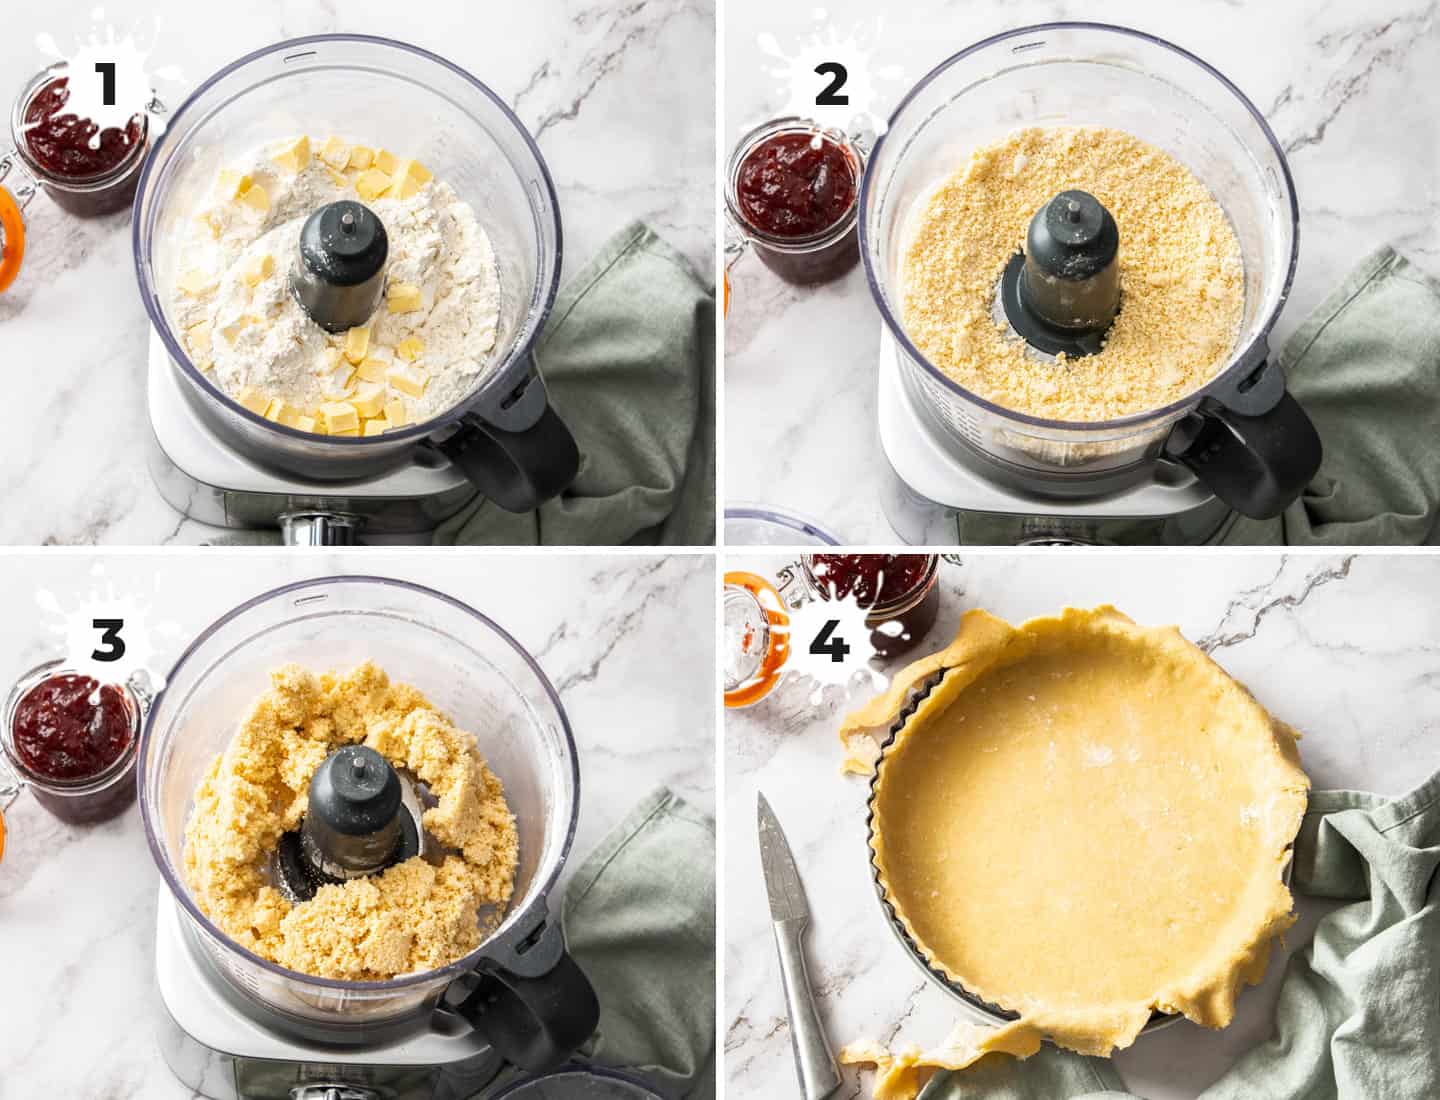 A collage of 4 images showing how to make the pastry for the tart.